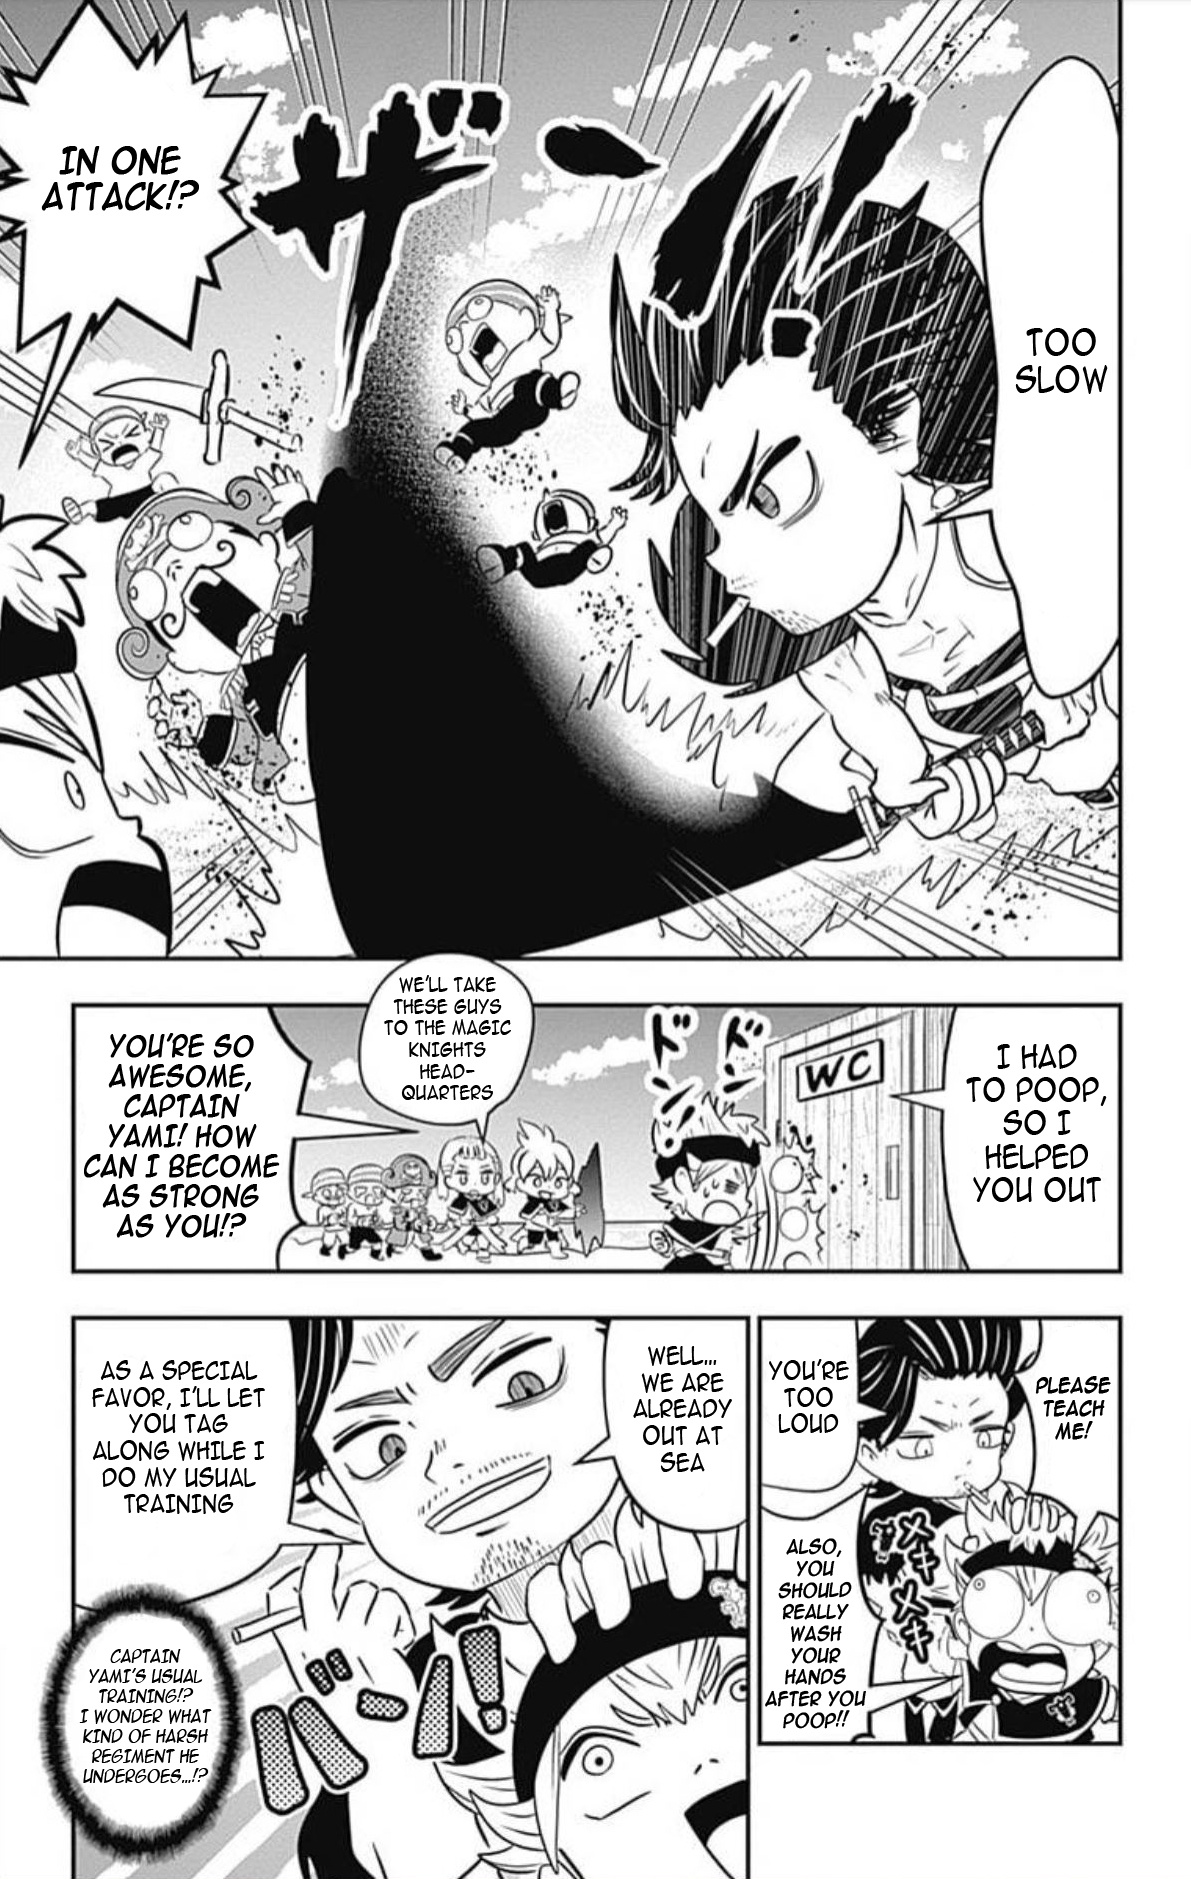 Black Clover Sd - Asta's Road To The Wizard King - Page 3